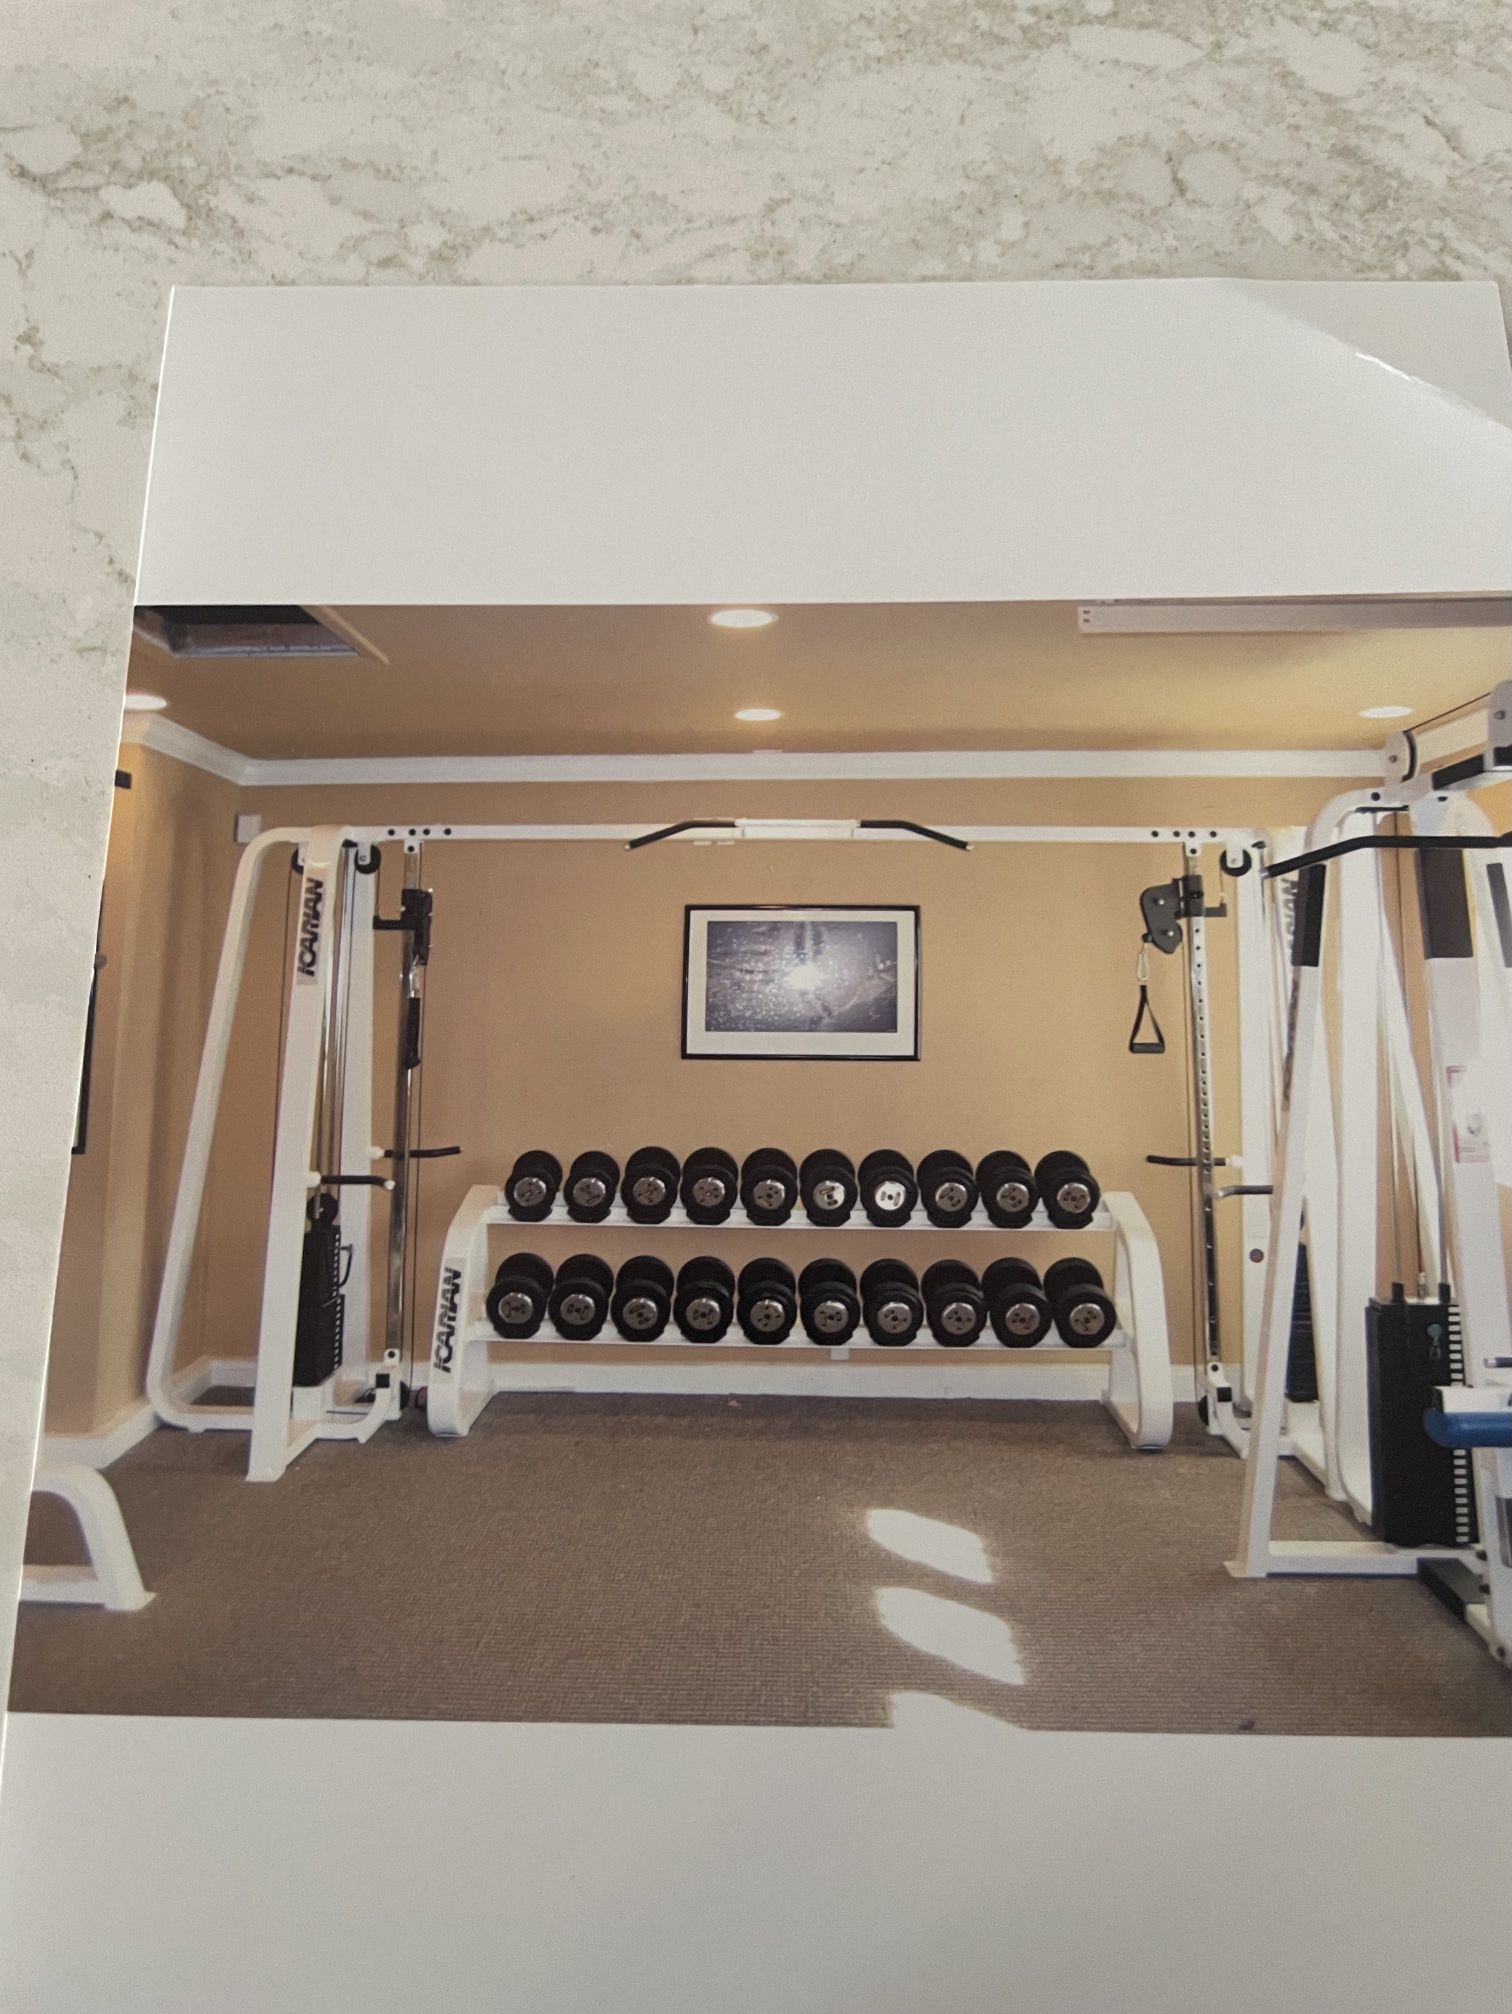 Icarian Commercial Gym Equipment 